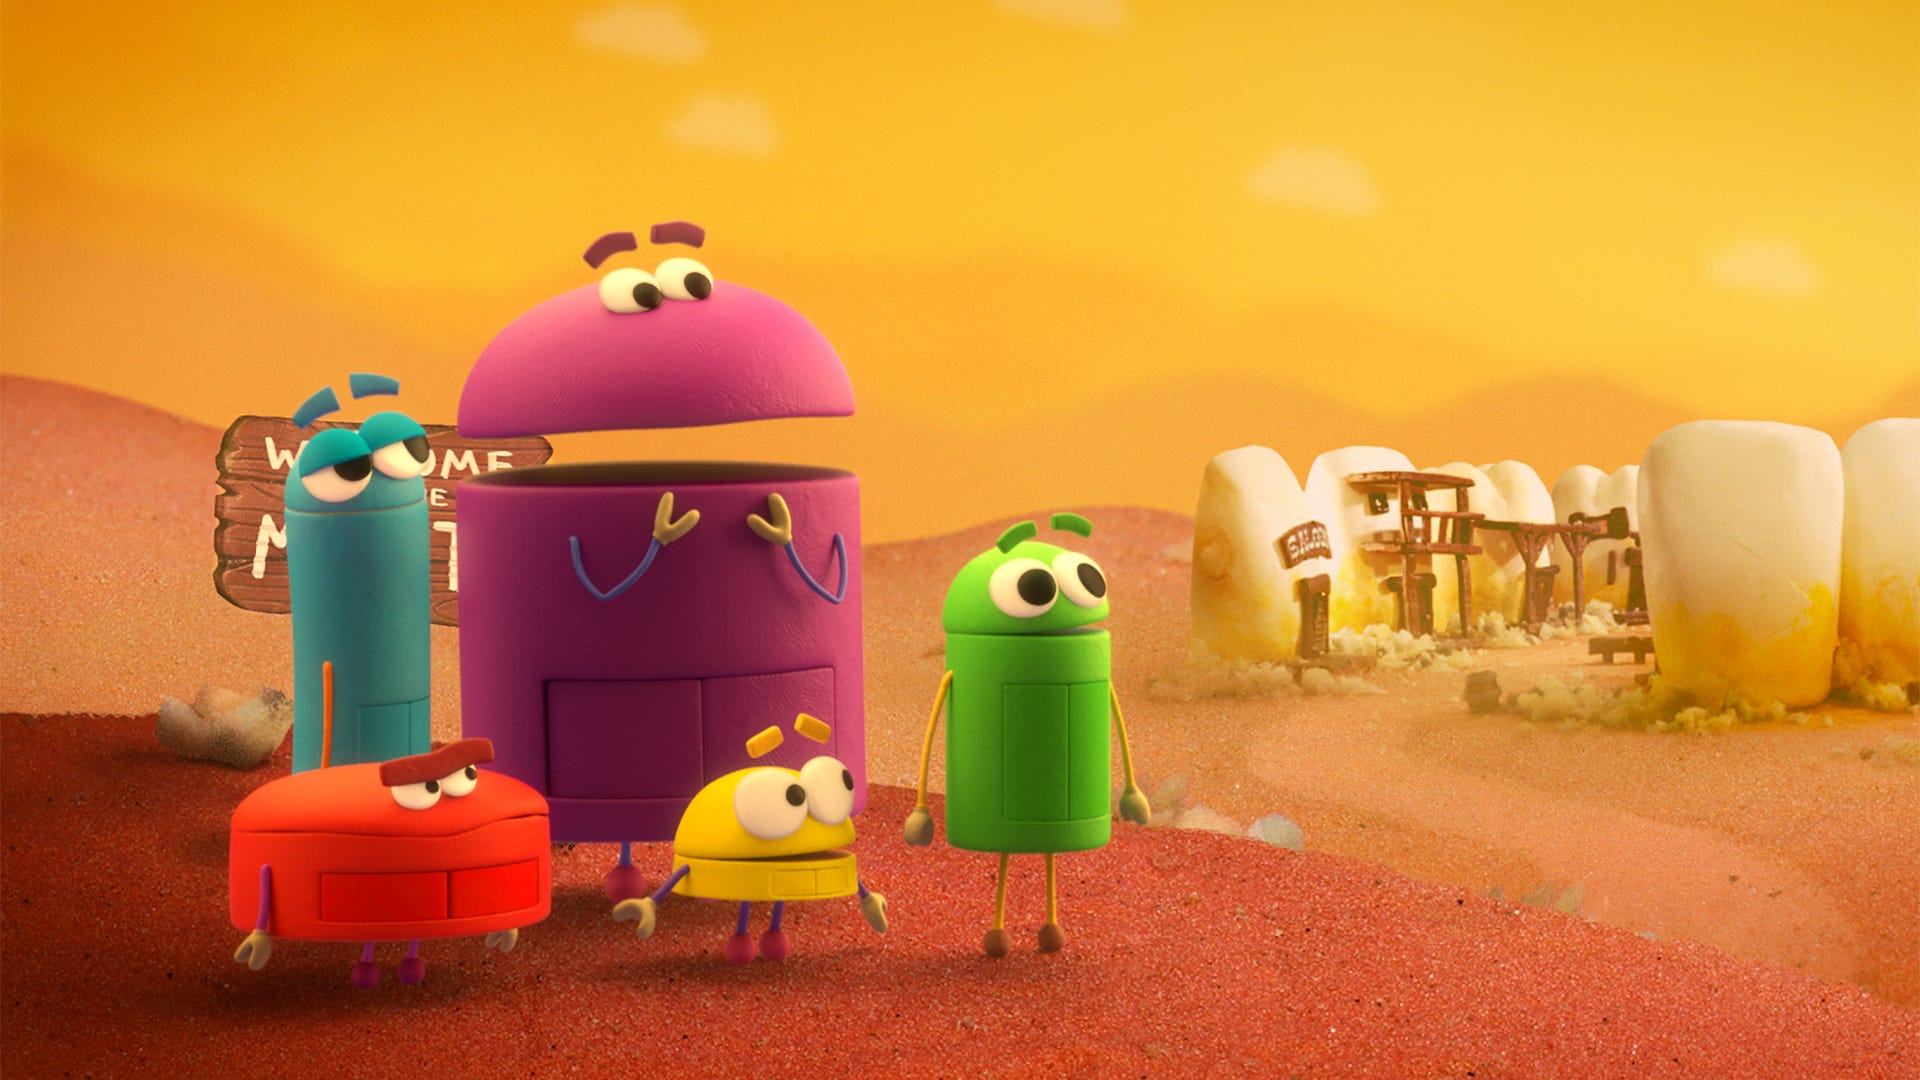 ​Ask the Storybots